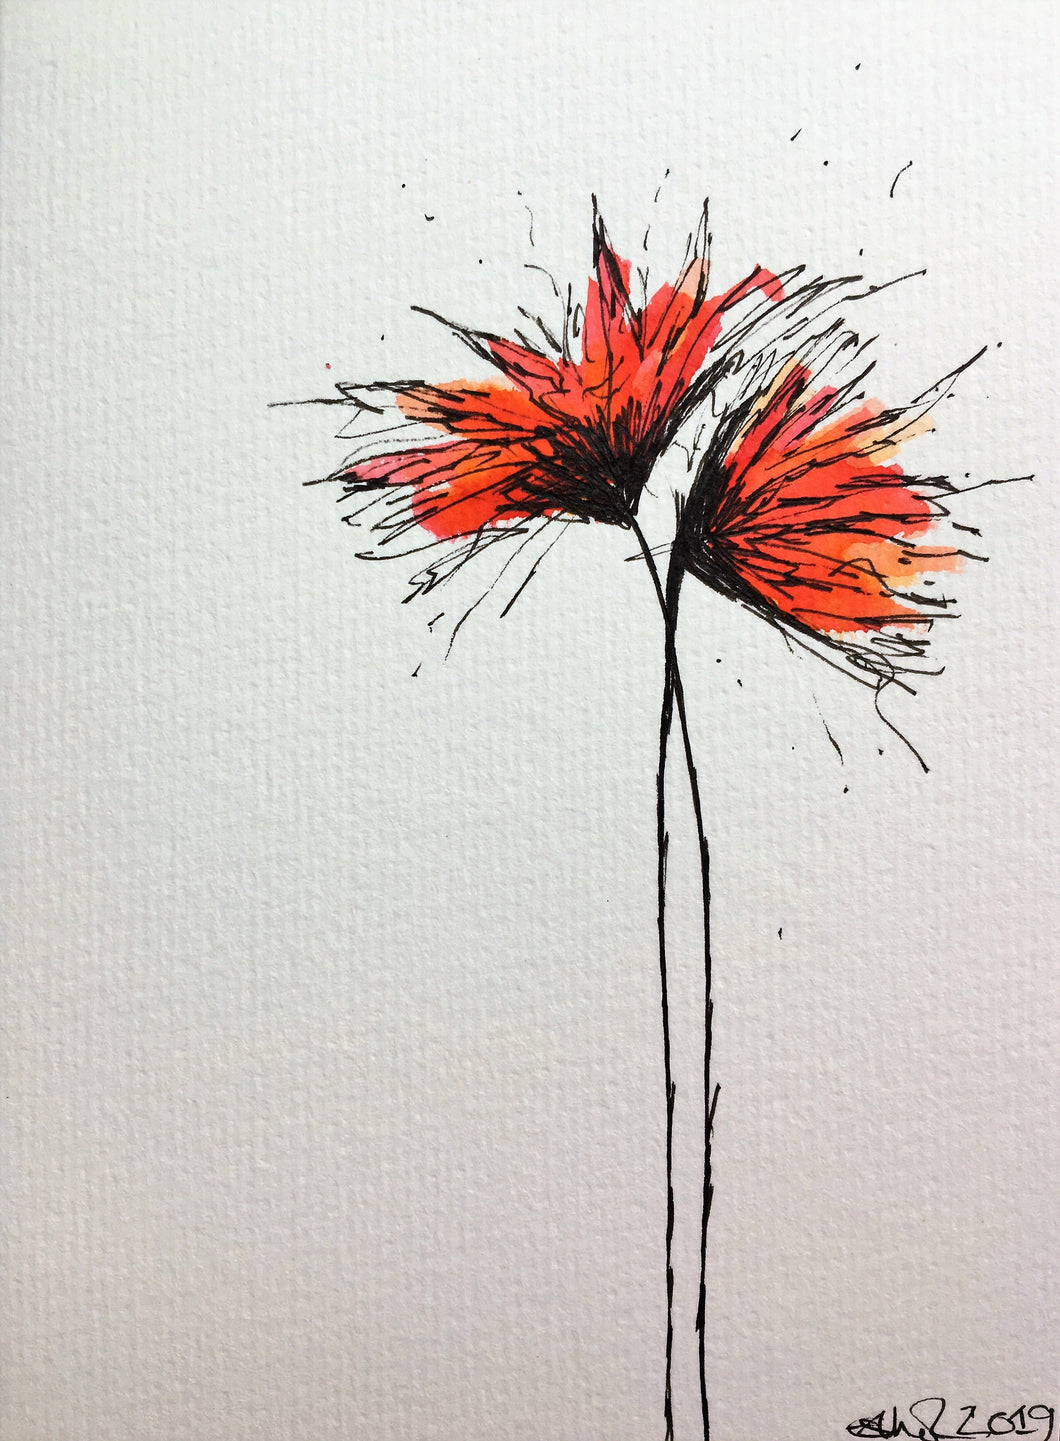 Hand-painted Greeting Card - Red, Orange and Yellow Spiky Flower Design - eDgE dEsiGn London